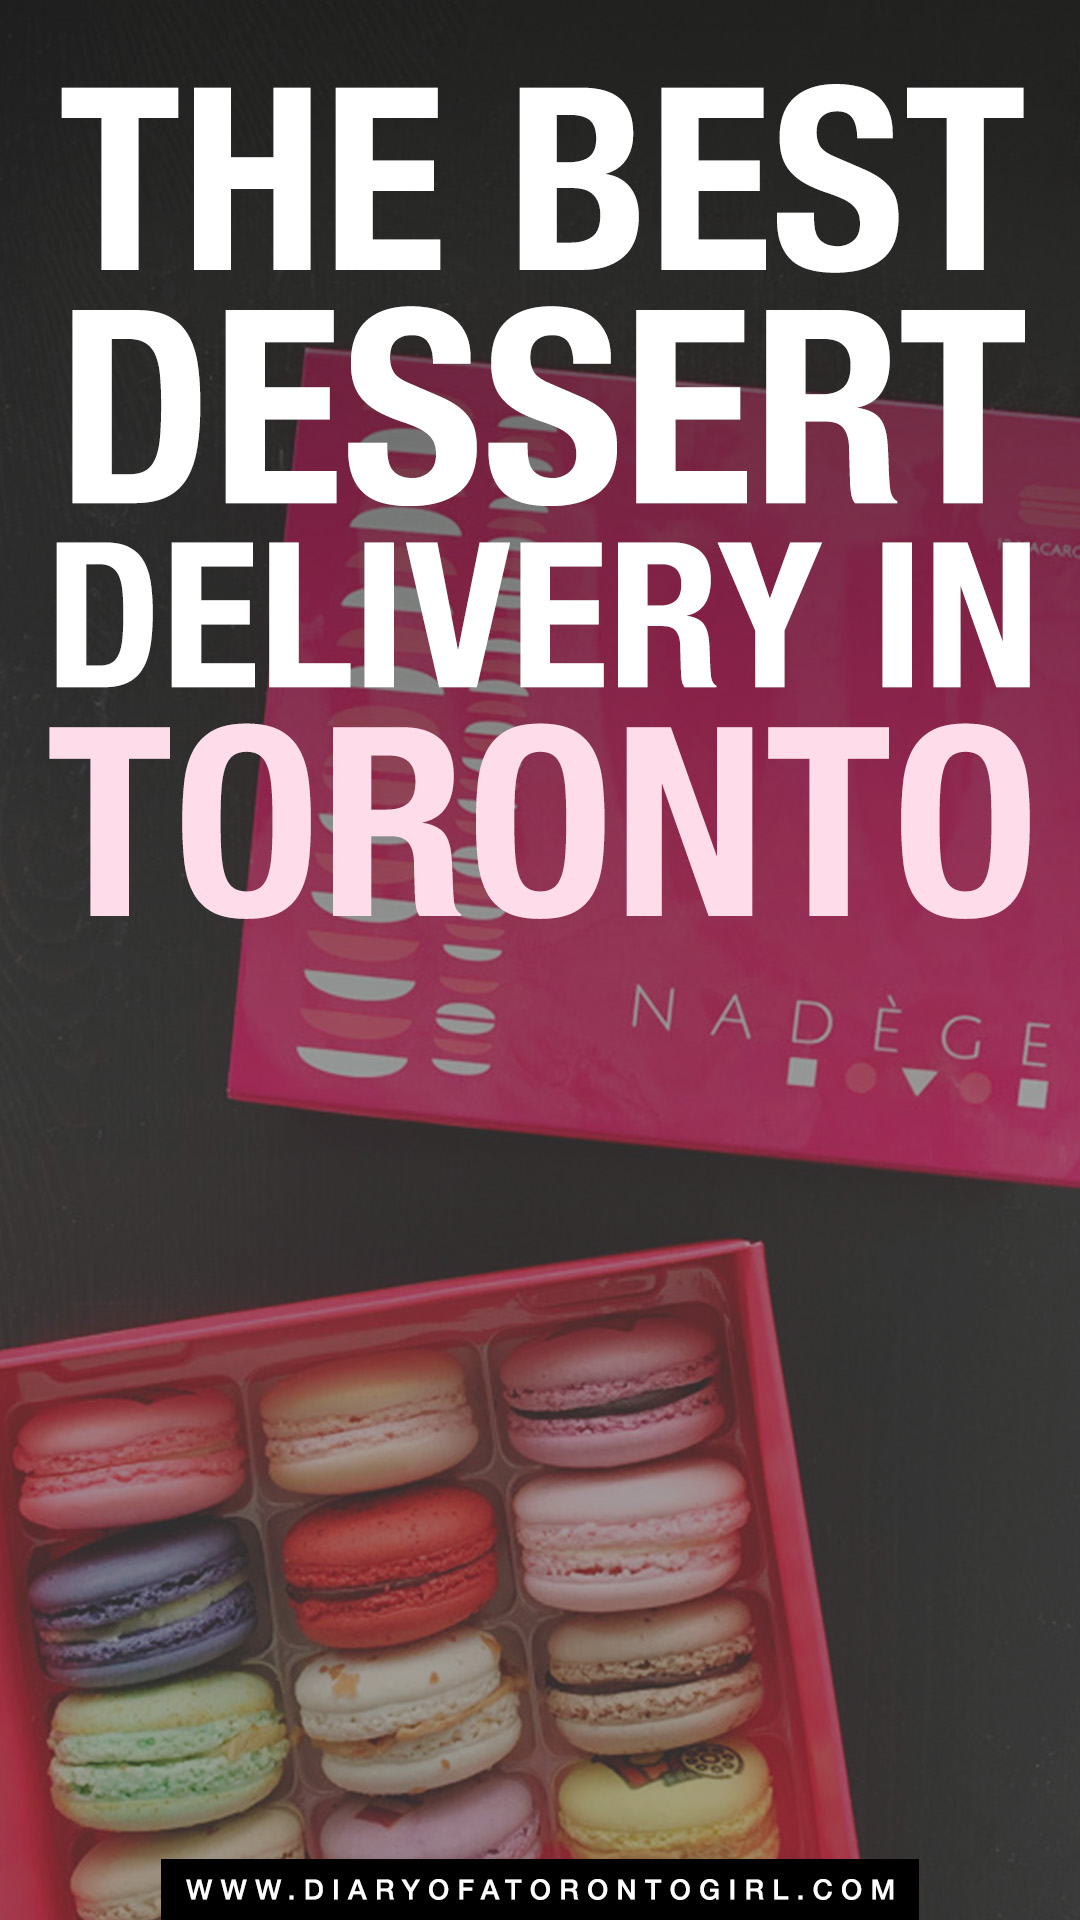 Dessert delivery in Toronto